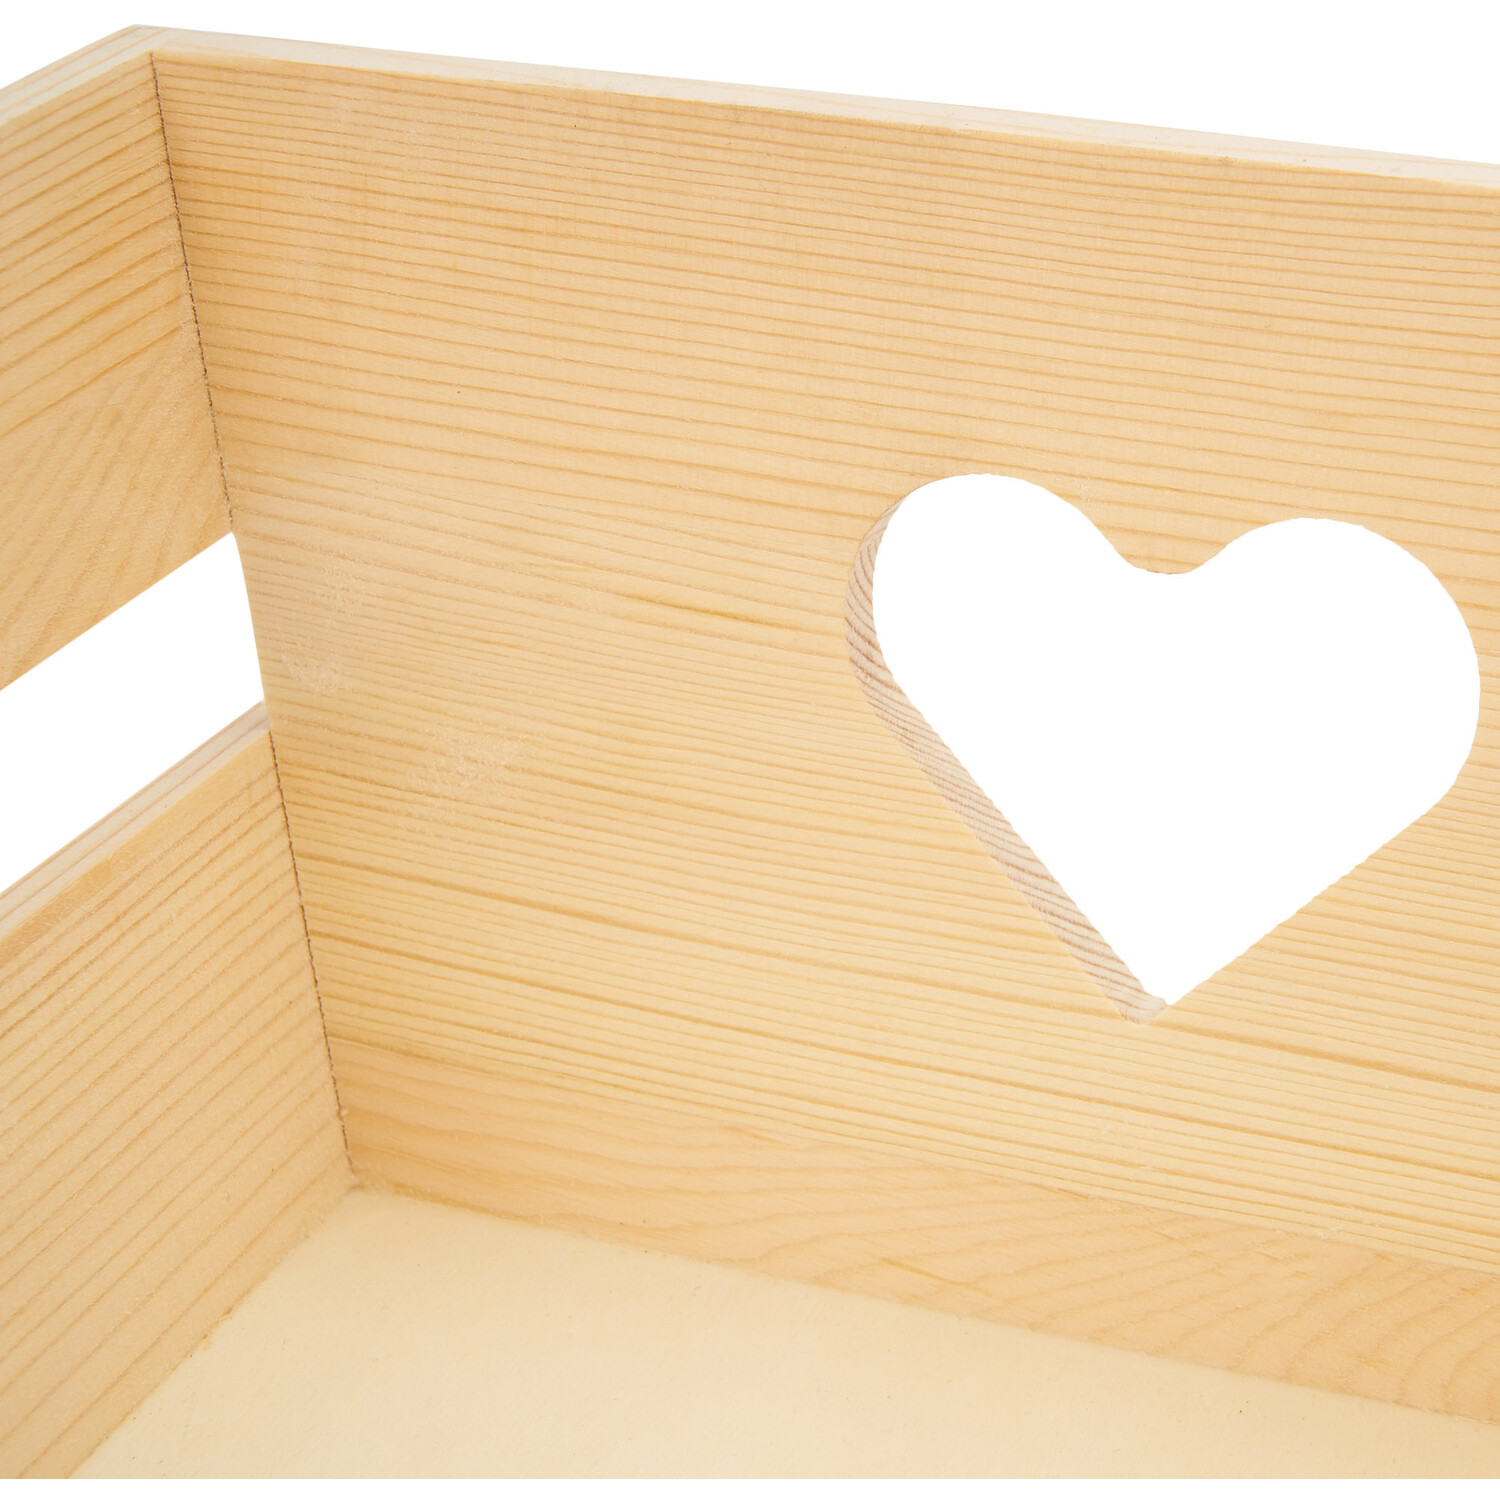 Wooden Craft Crate Image 3